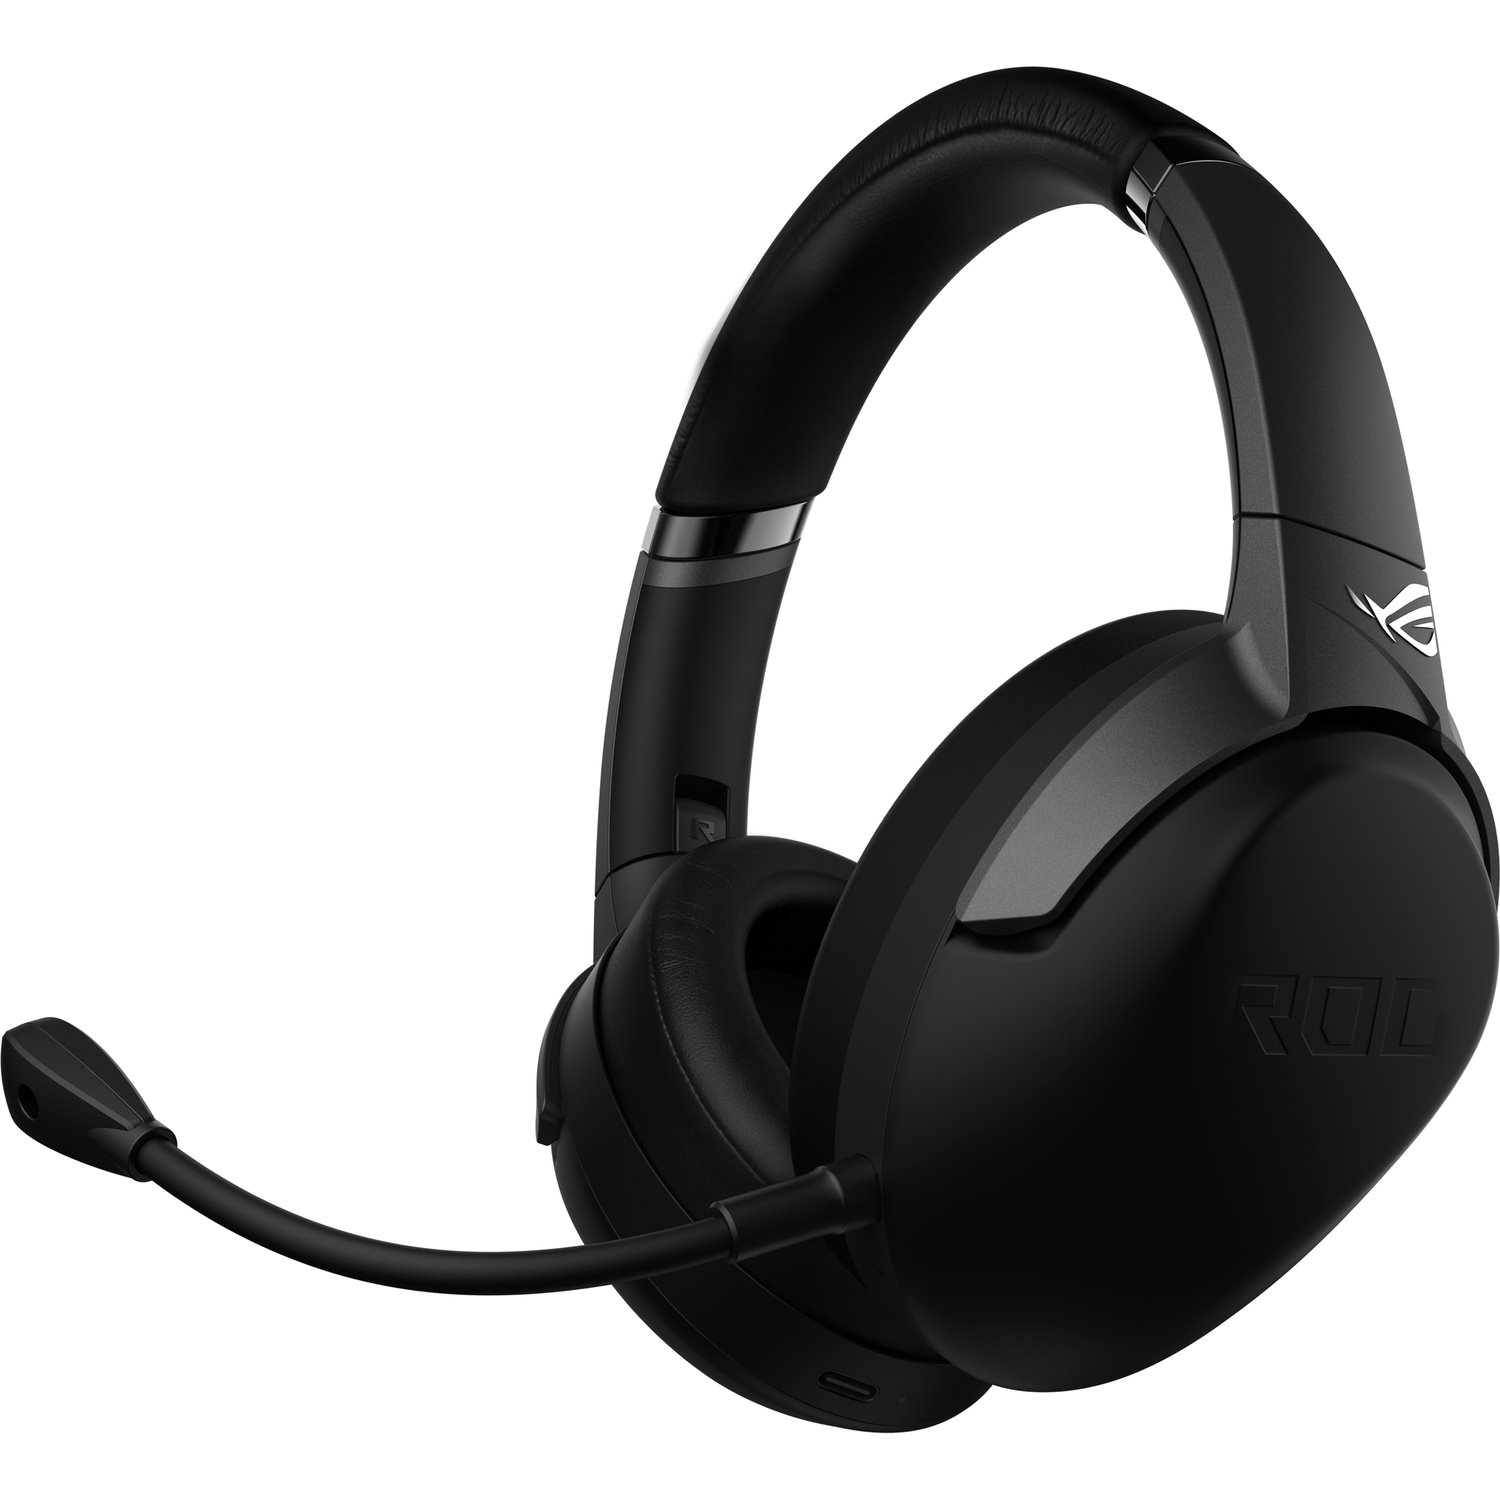 Asus ROG Strix Go 2.4 Wired/Wireless Over-the-head Stereo Gaming Headset